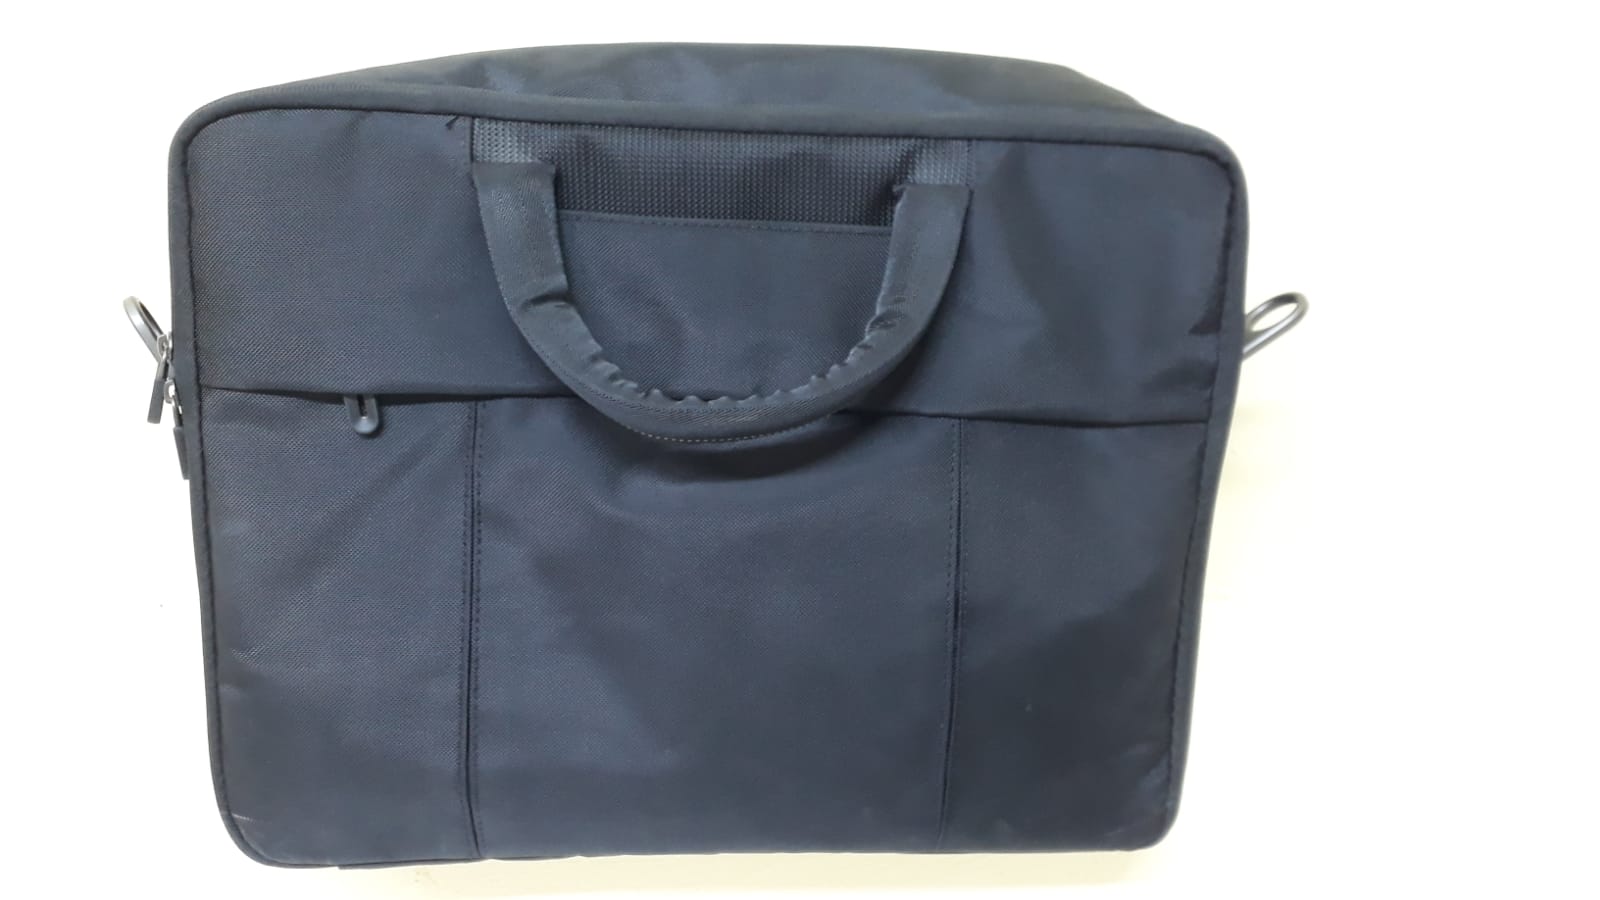 Buy Dell Safety 102 Laptop Bag Case Online at Technology Valley | Tv-IT ...